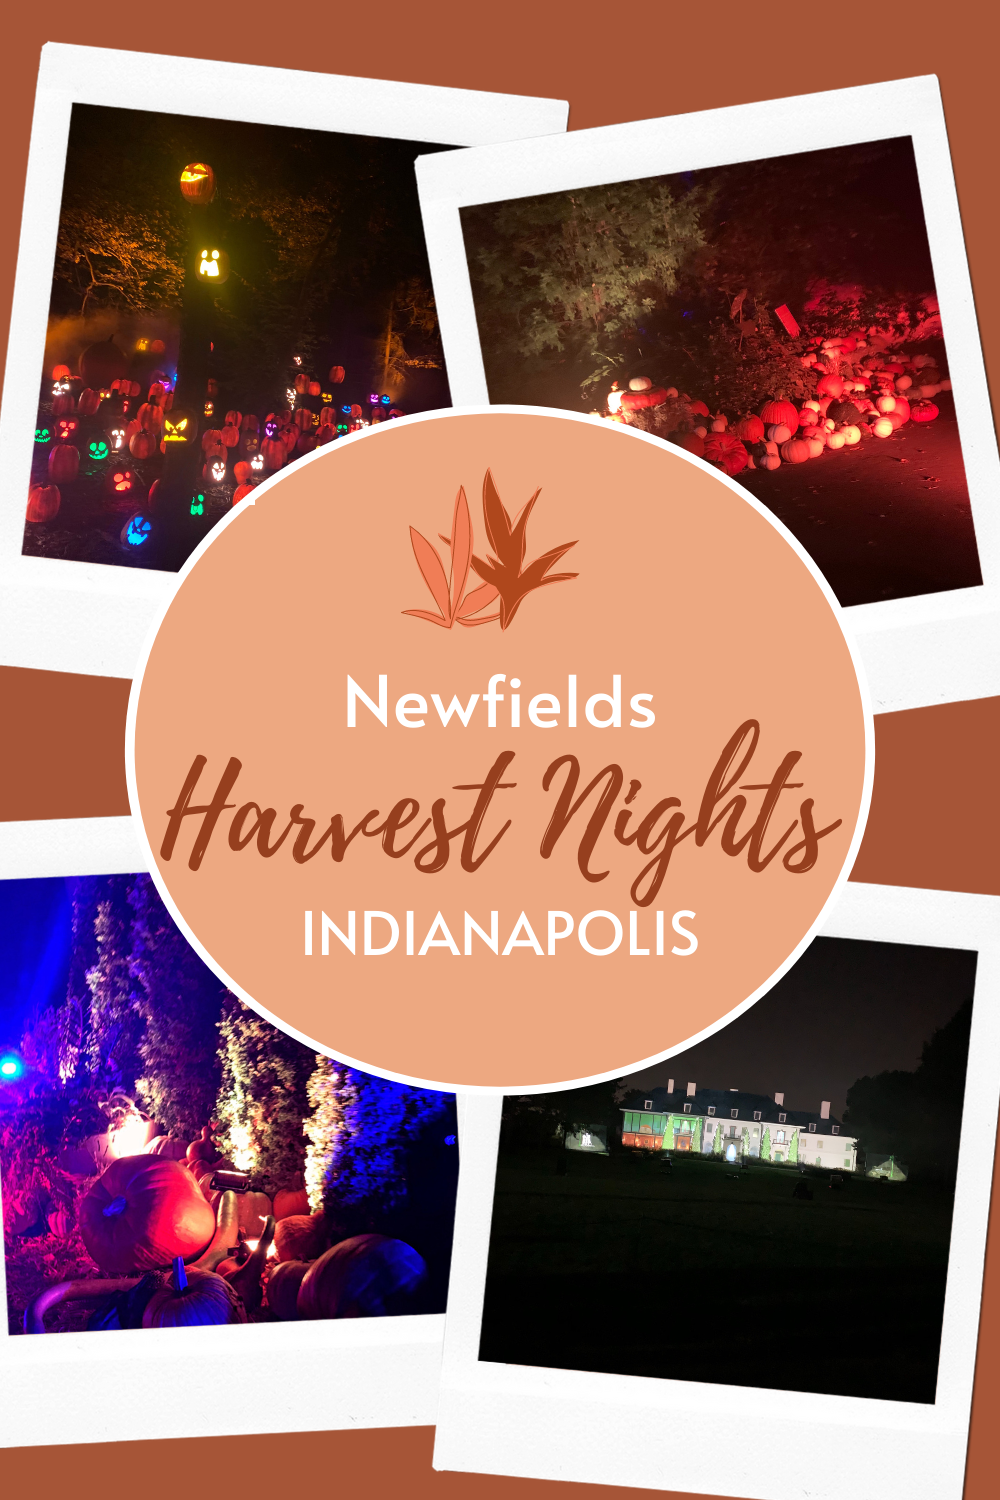 Newfields Harvest Nights, Indianapolis